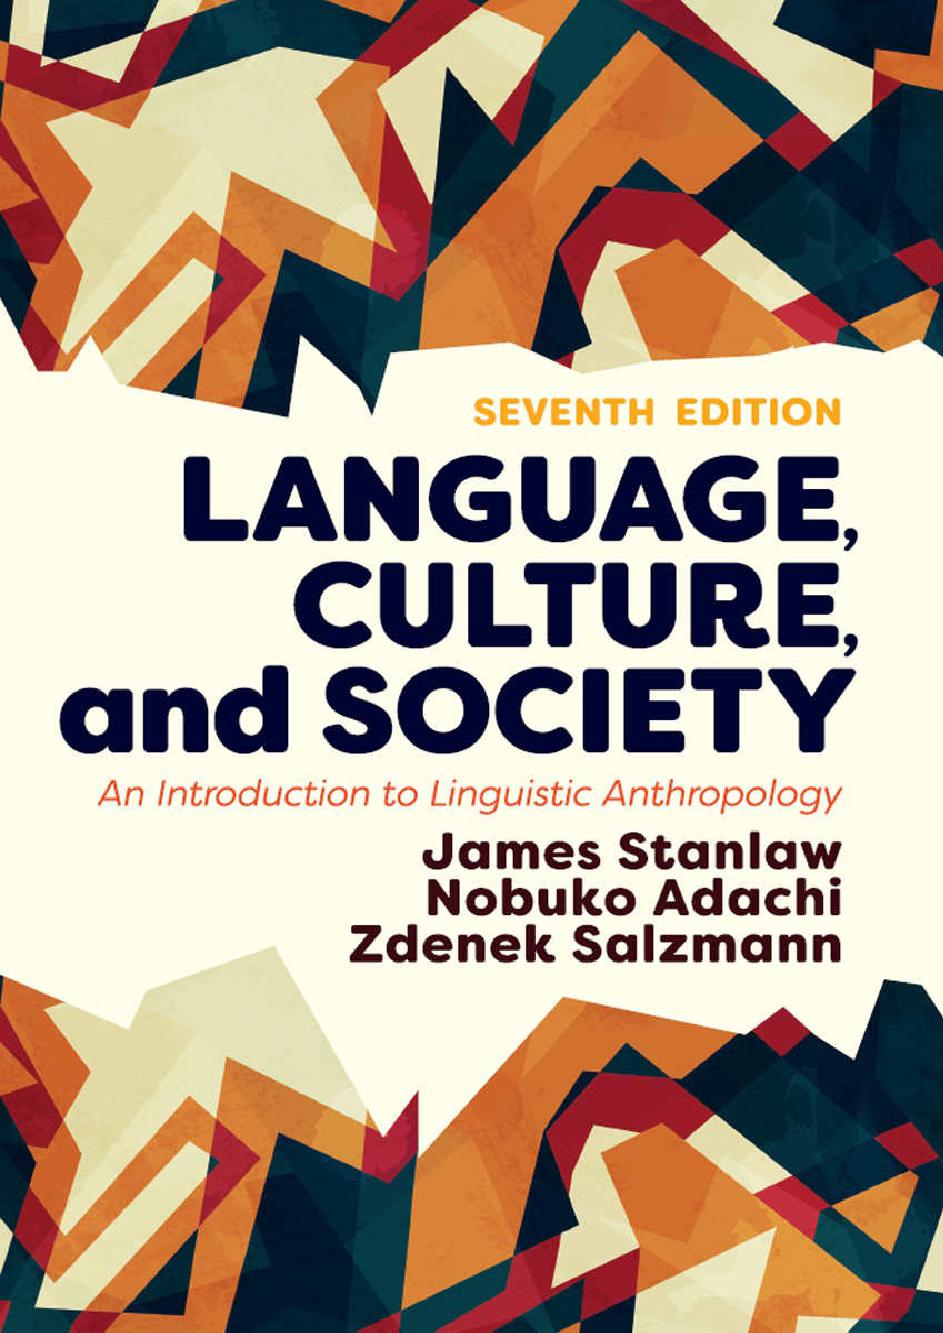 Language, culture, and society : An introduction to linguistic anthropology